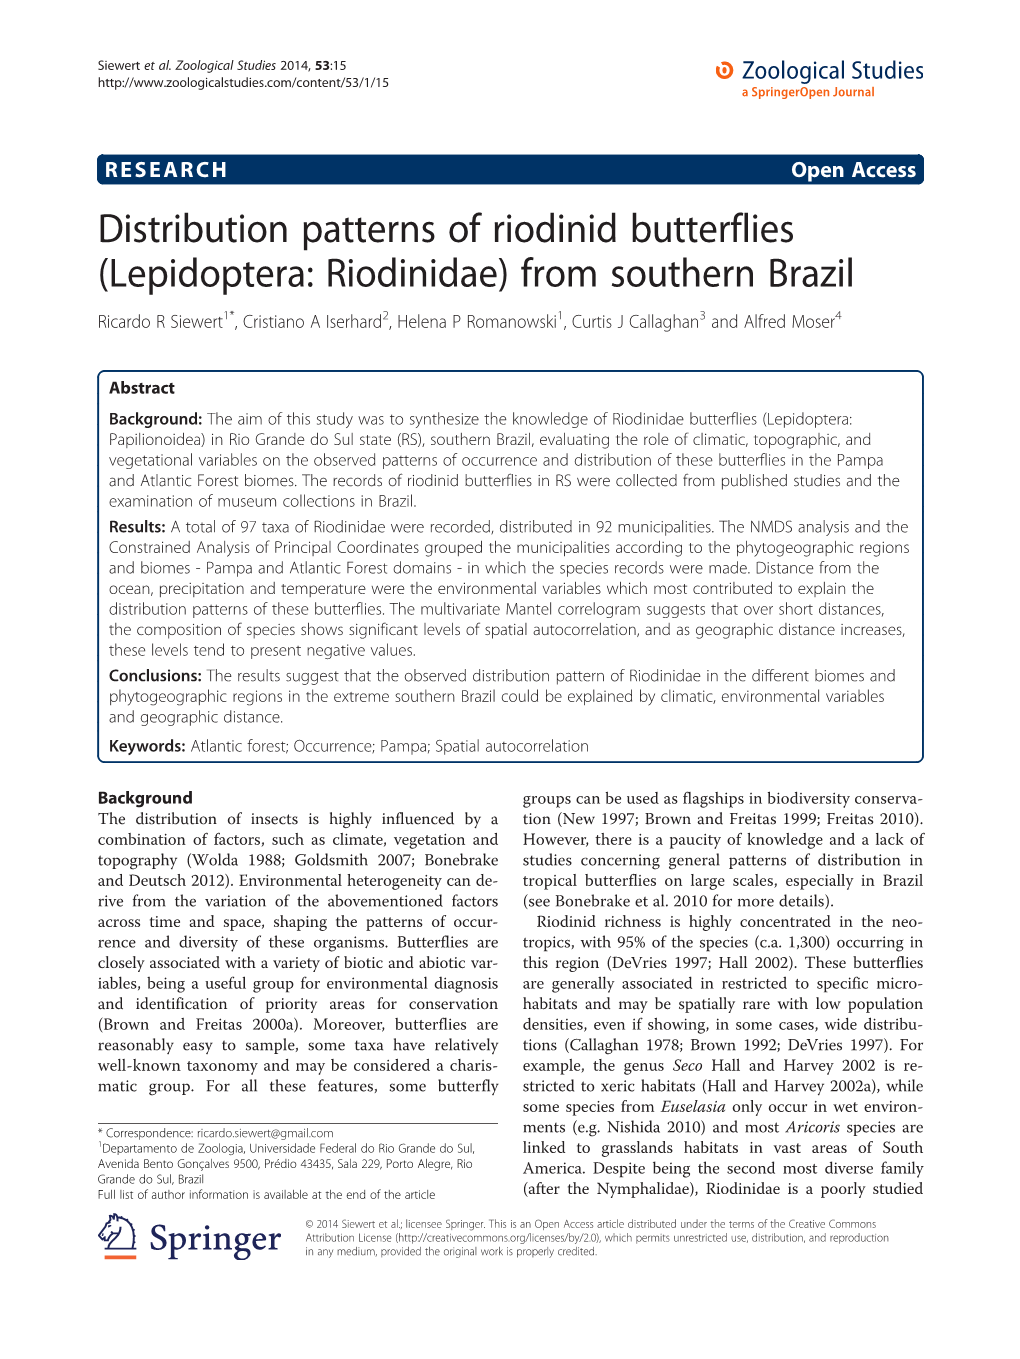 Distribution Patterns of Riodinid Butterflies (Lepidoptera: Riodinidae